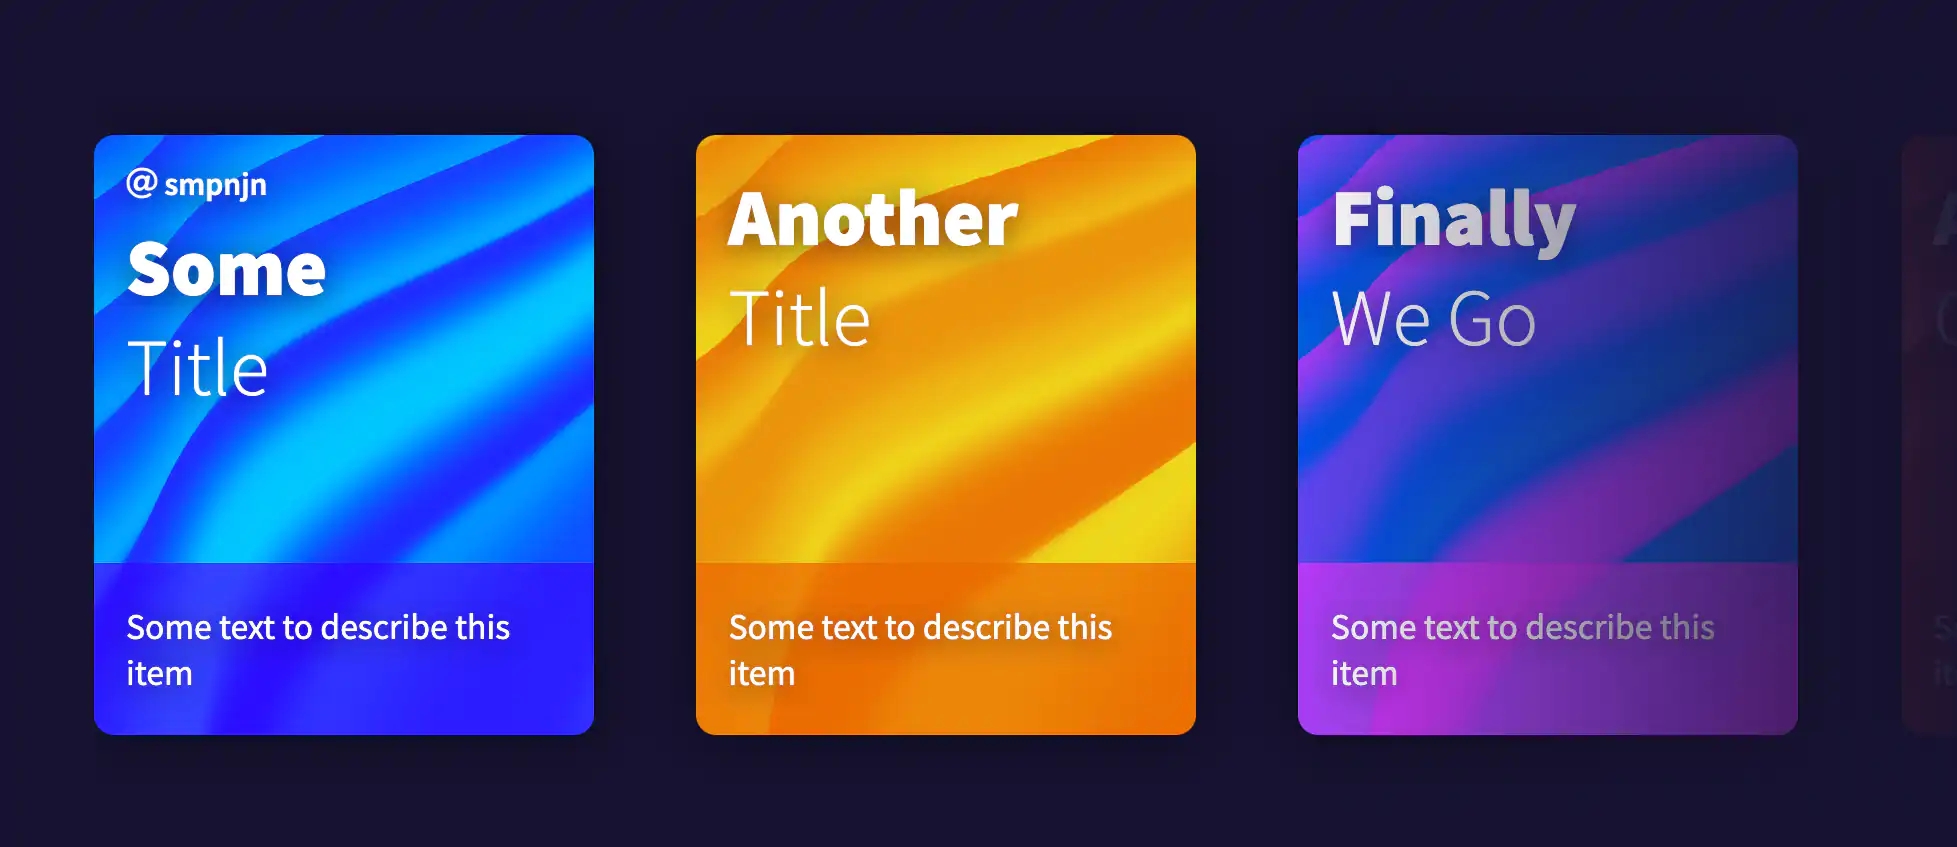 How to Create Animated Cards with WebGL and Three.js